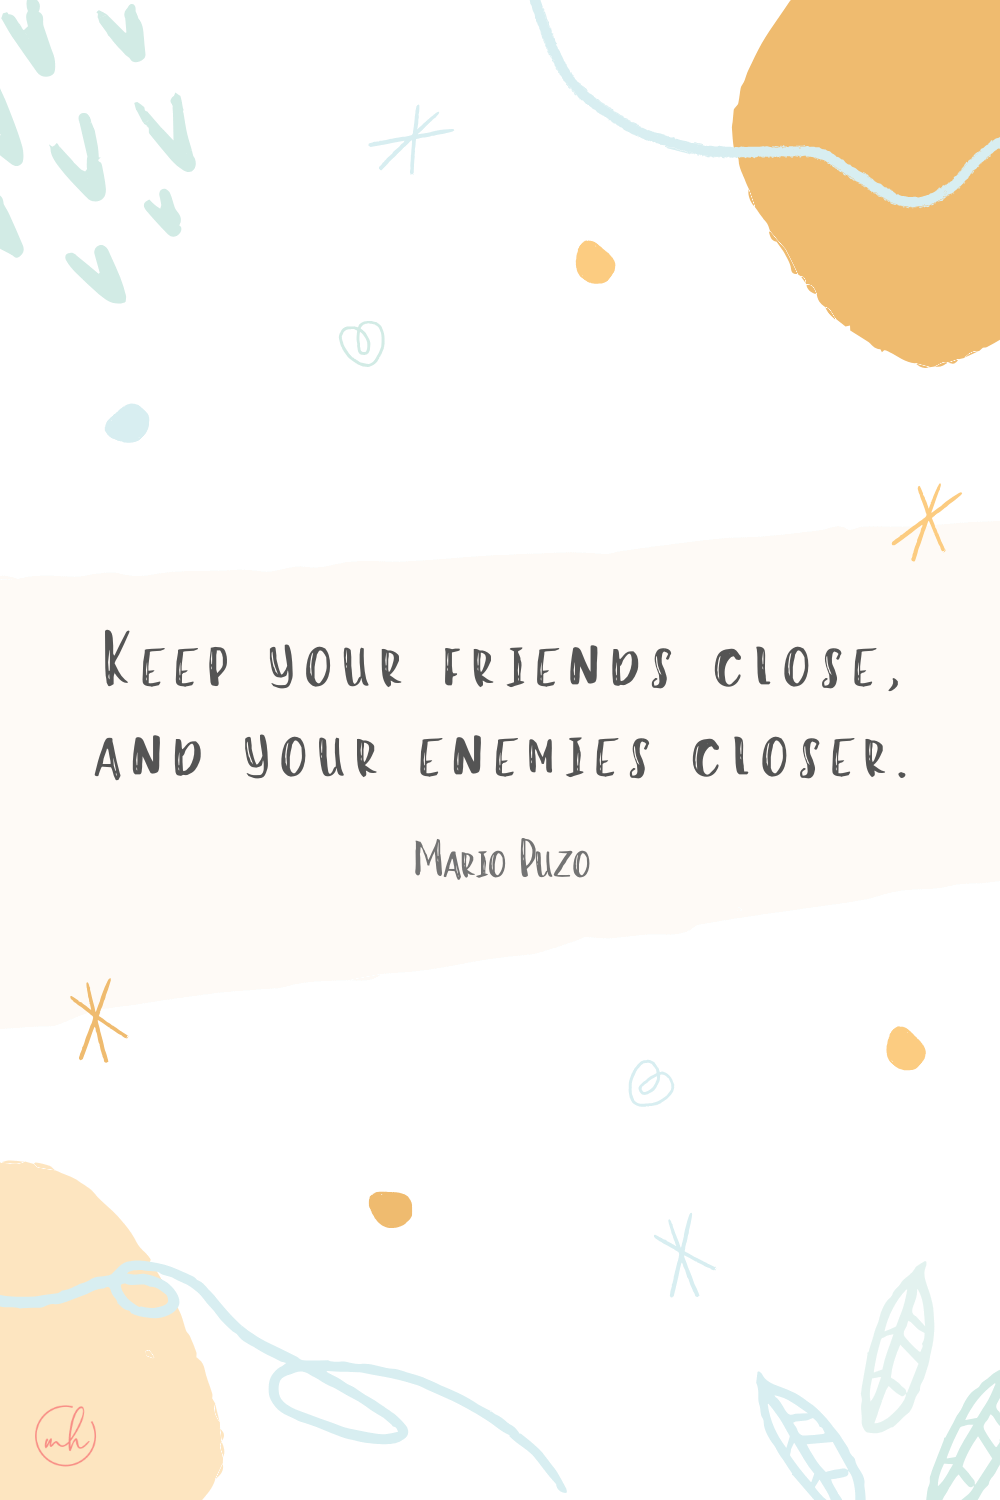 "Keep your friends close, and your enemies closer." - Mario Puzo